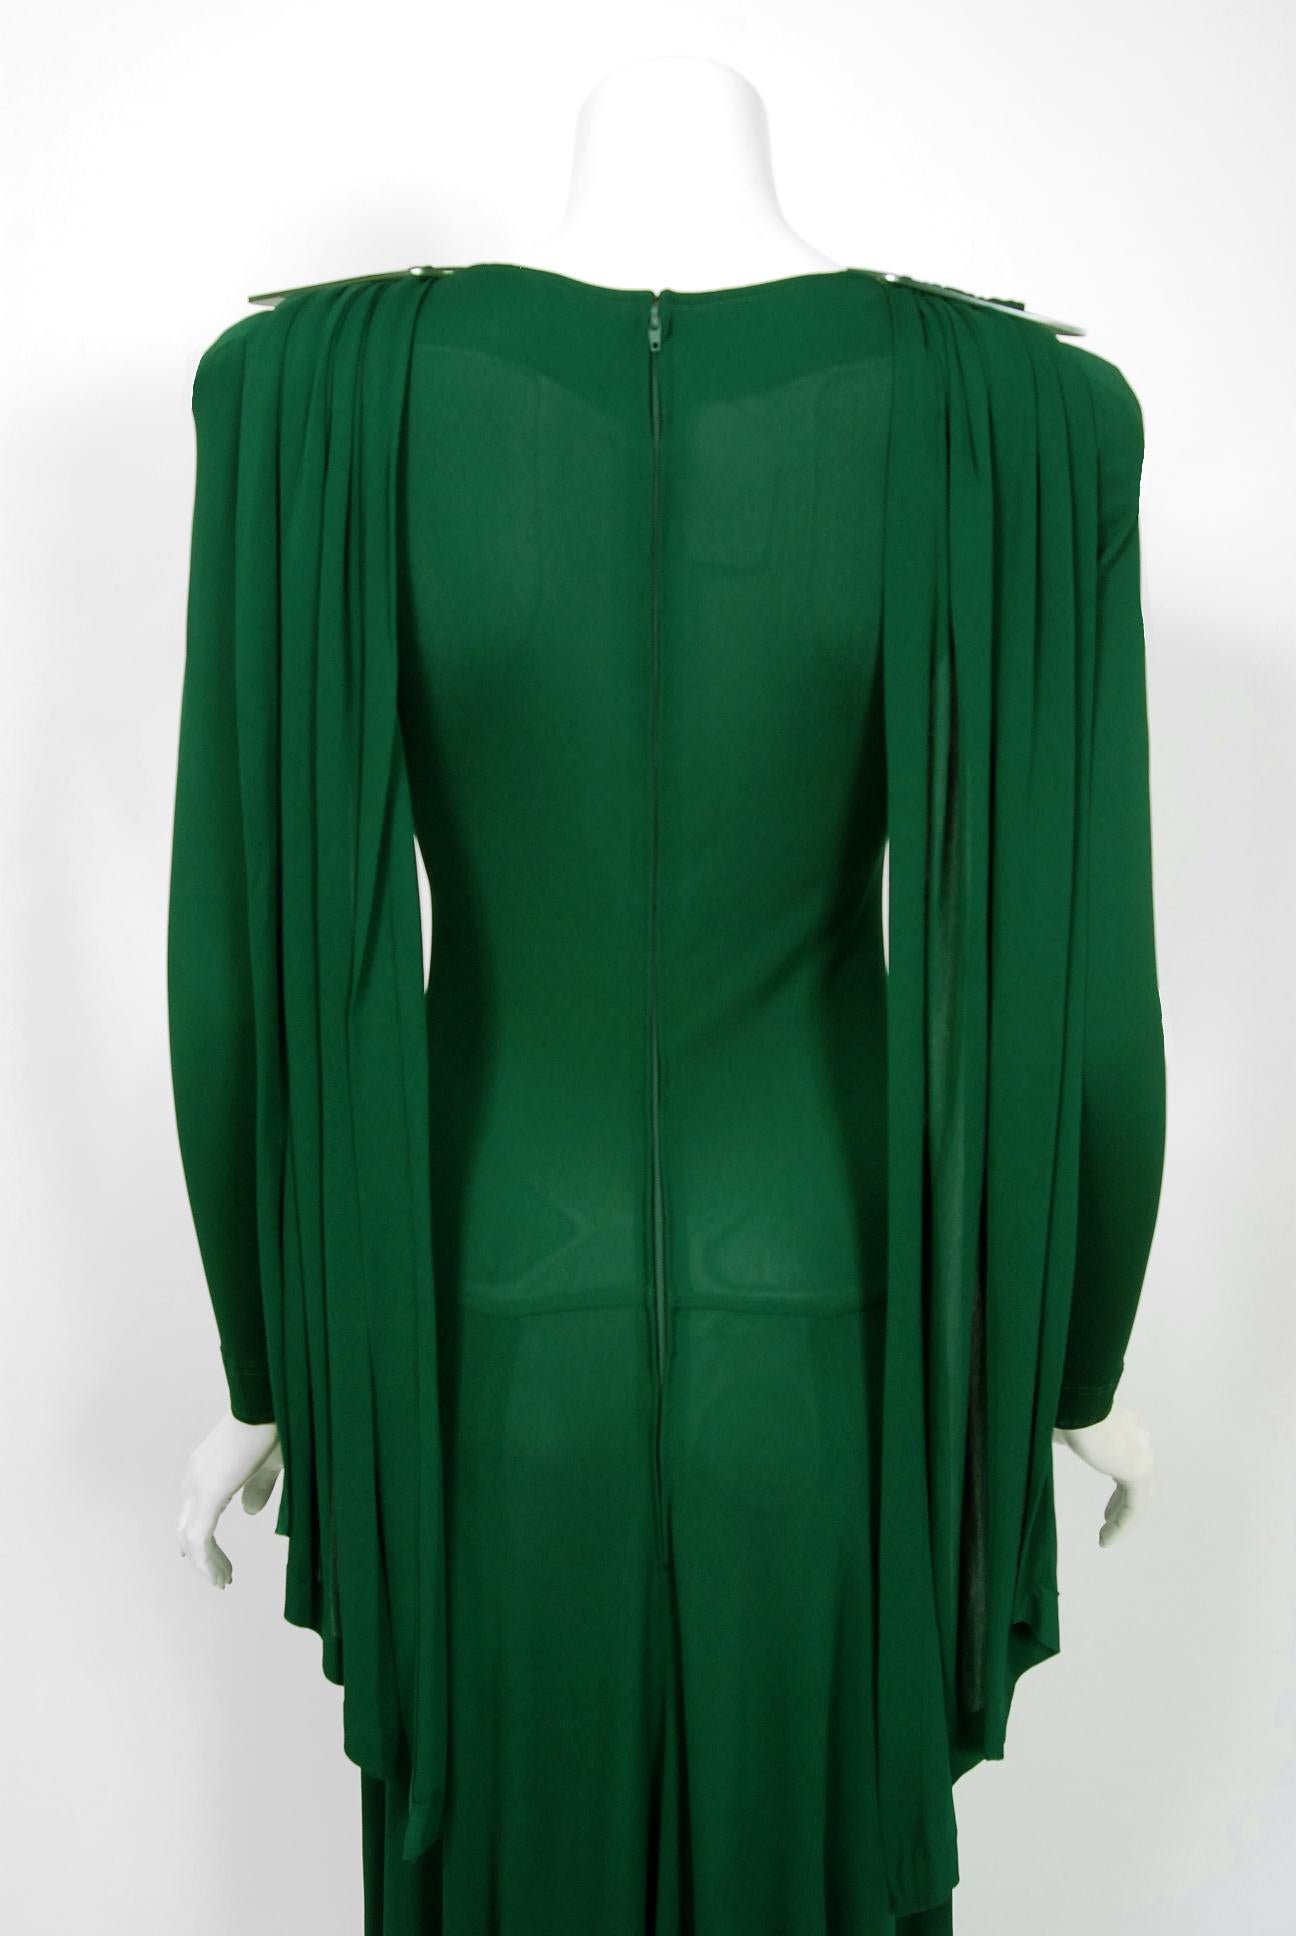 1975 Jean Muir Forest-Green Jersey Scarf-Tie Buckles Winged Back Maxi Dress 3